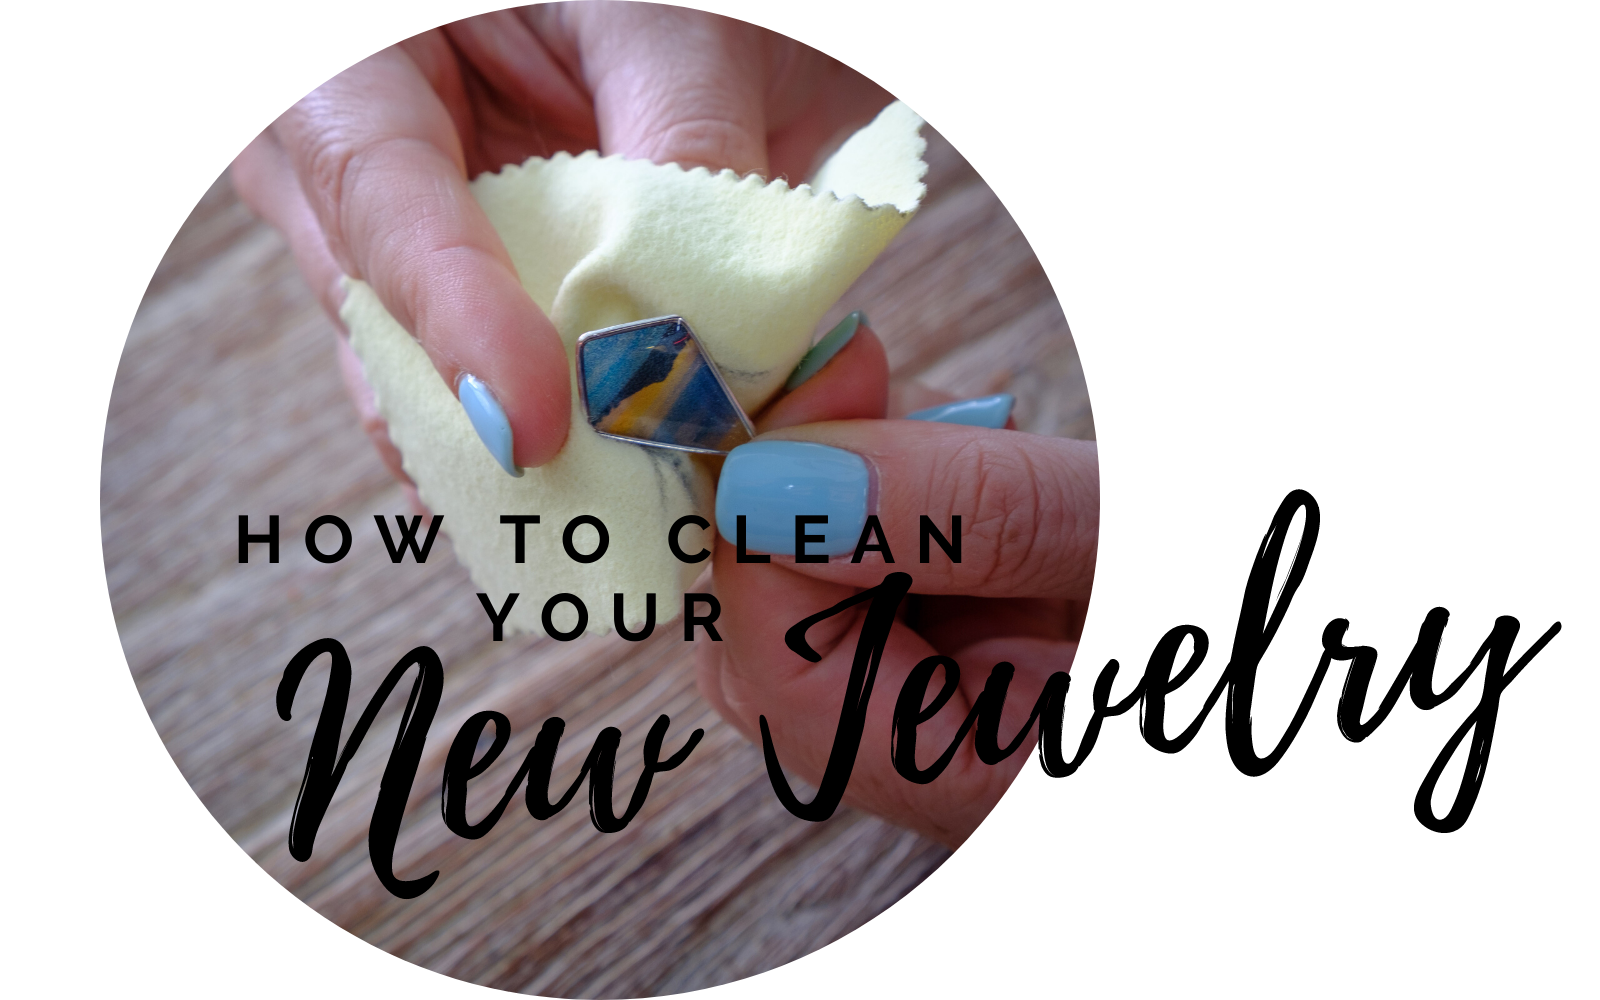 How to clean your Foterra Jewelry